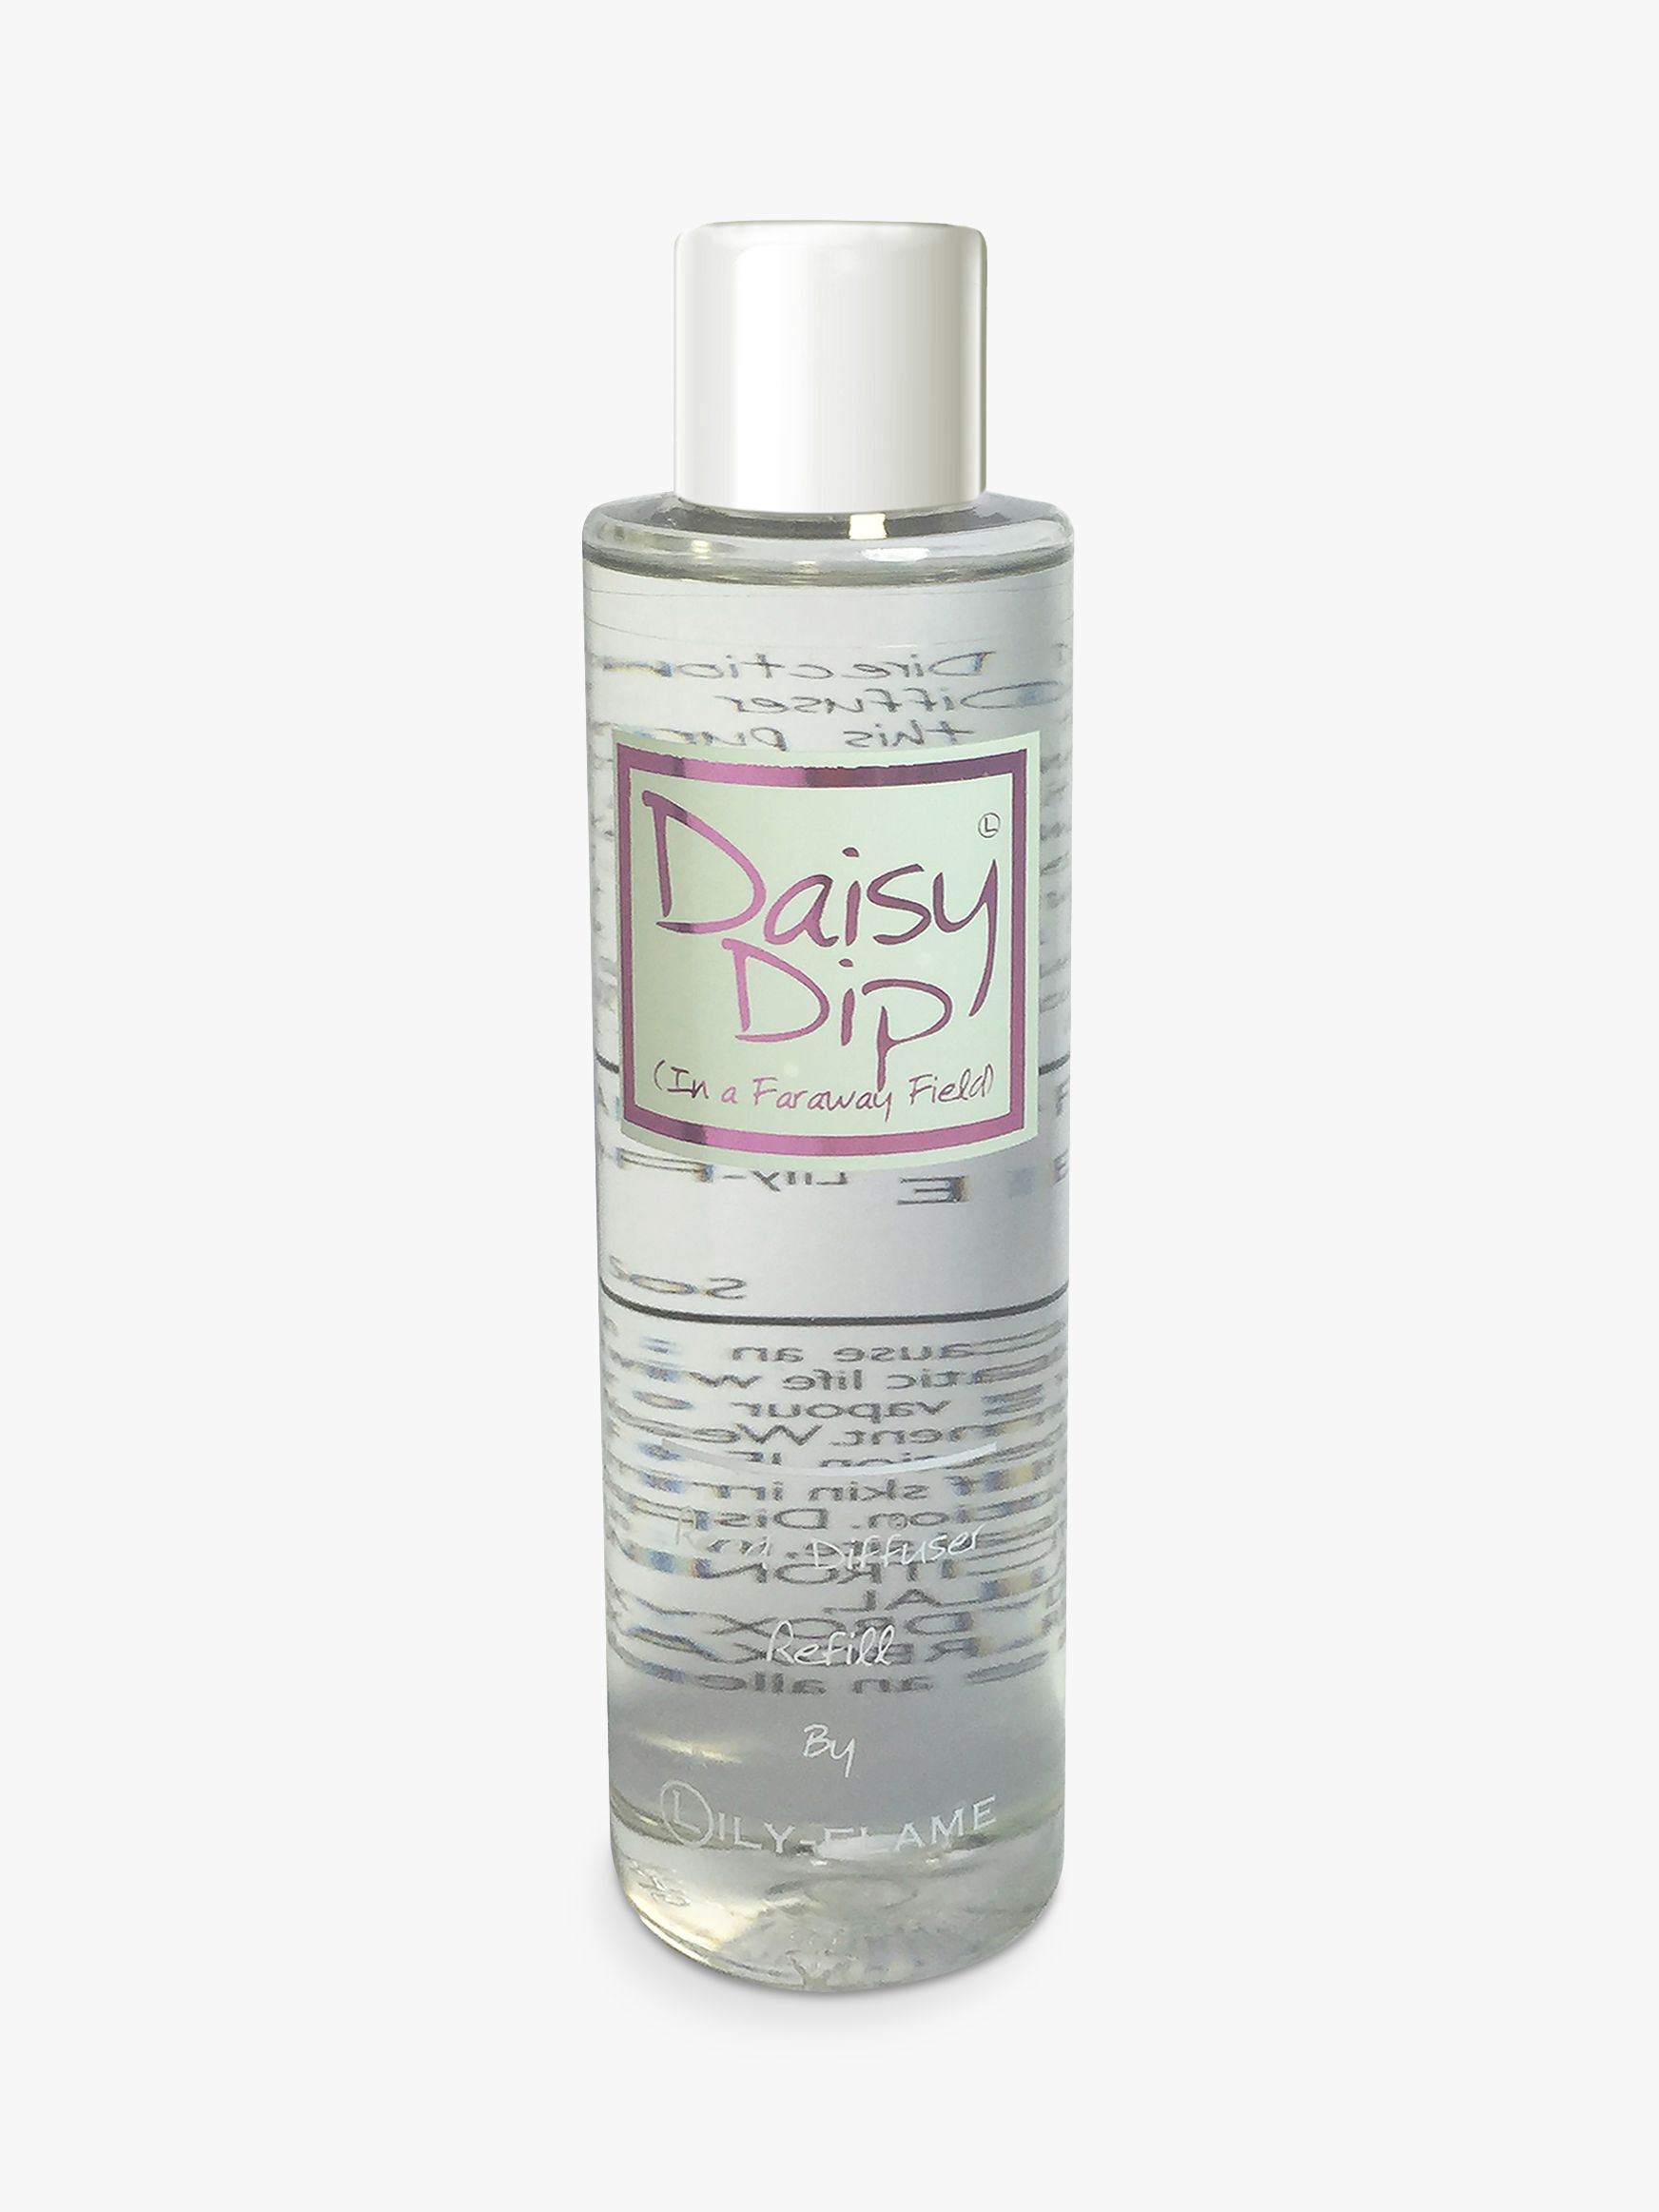 Lily-flame Daisy Dip Diffuser Refill